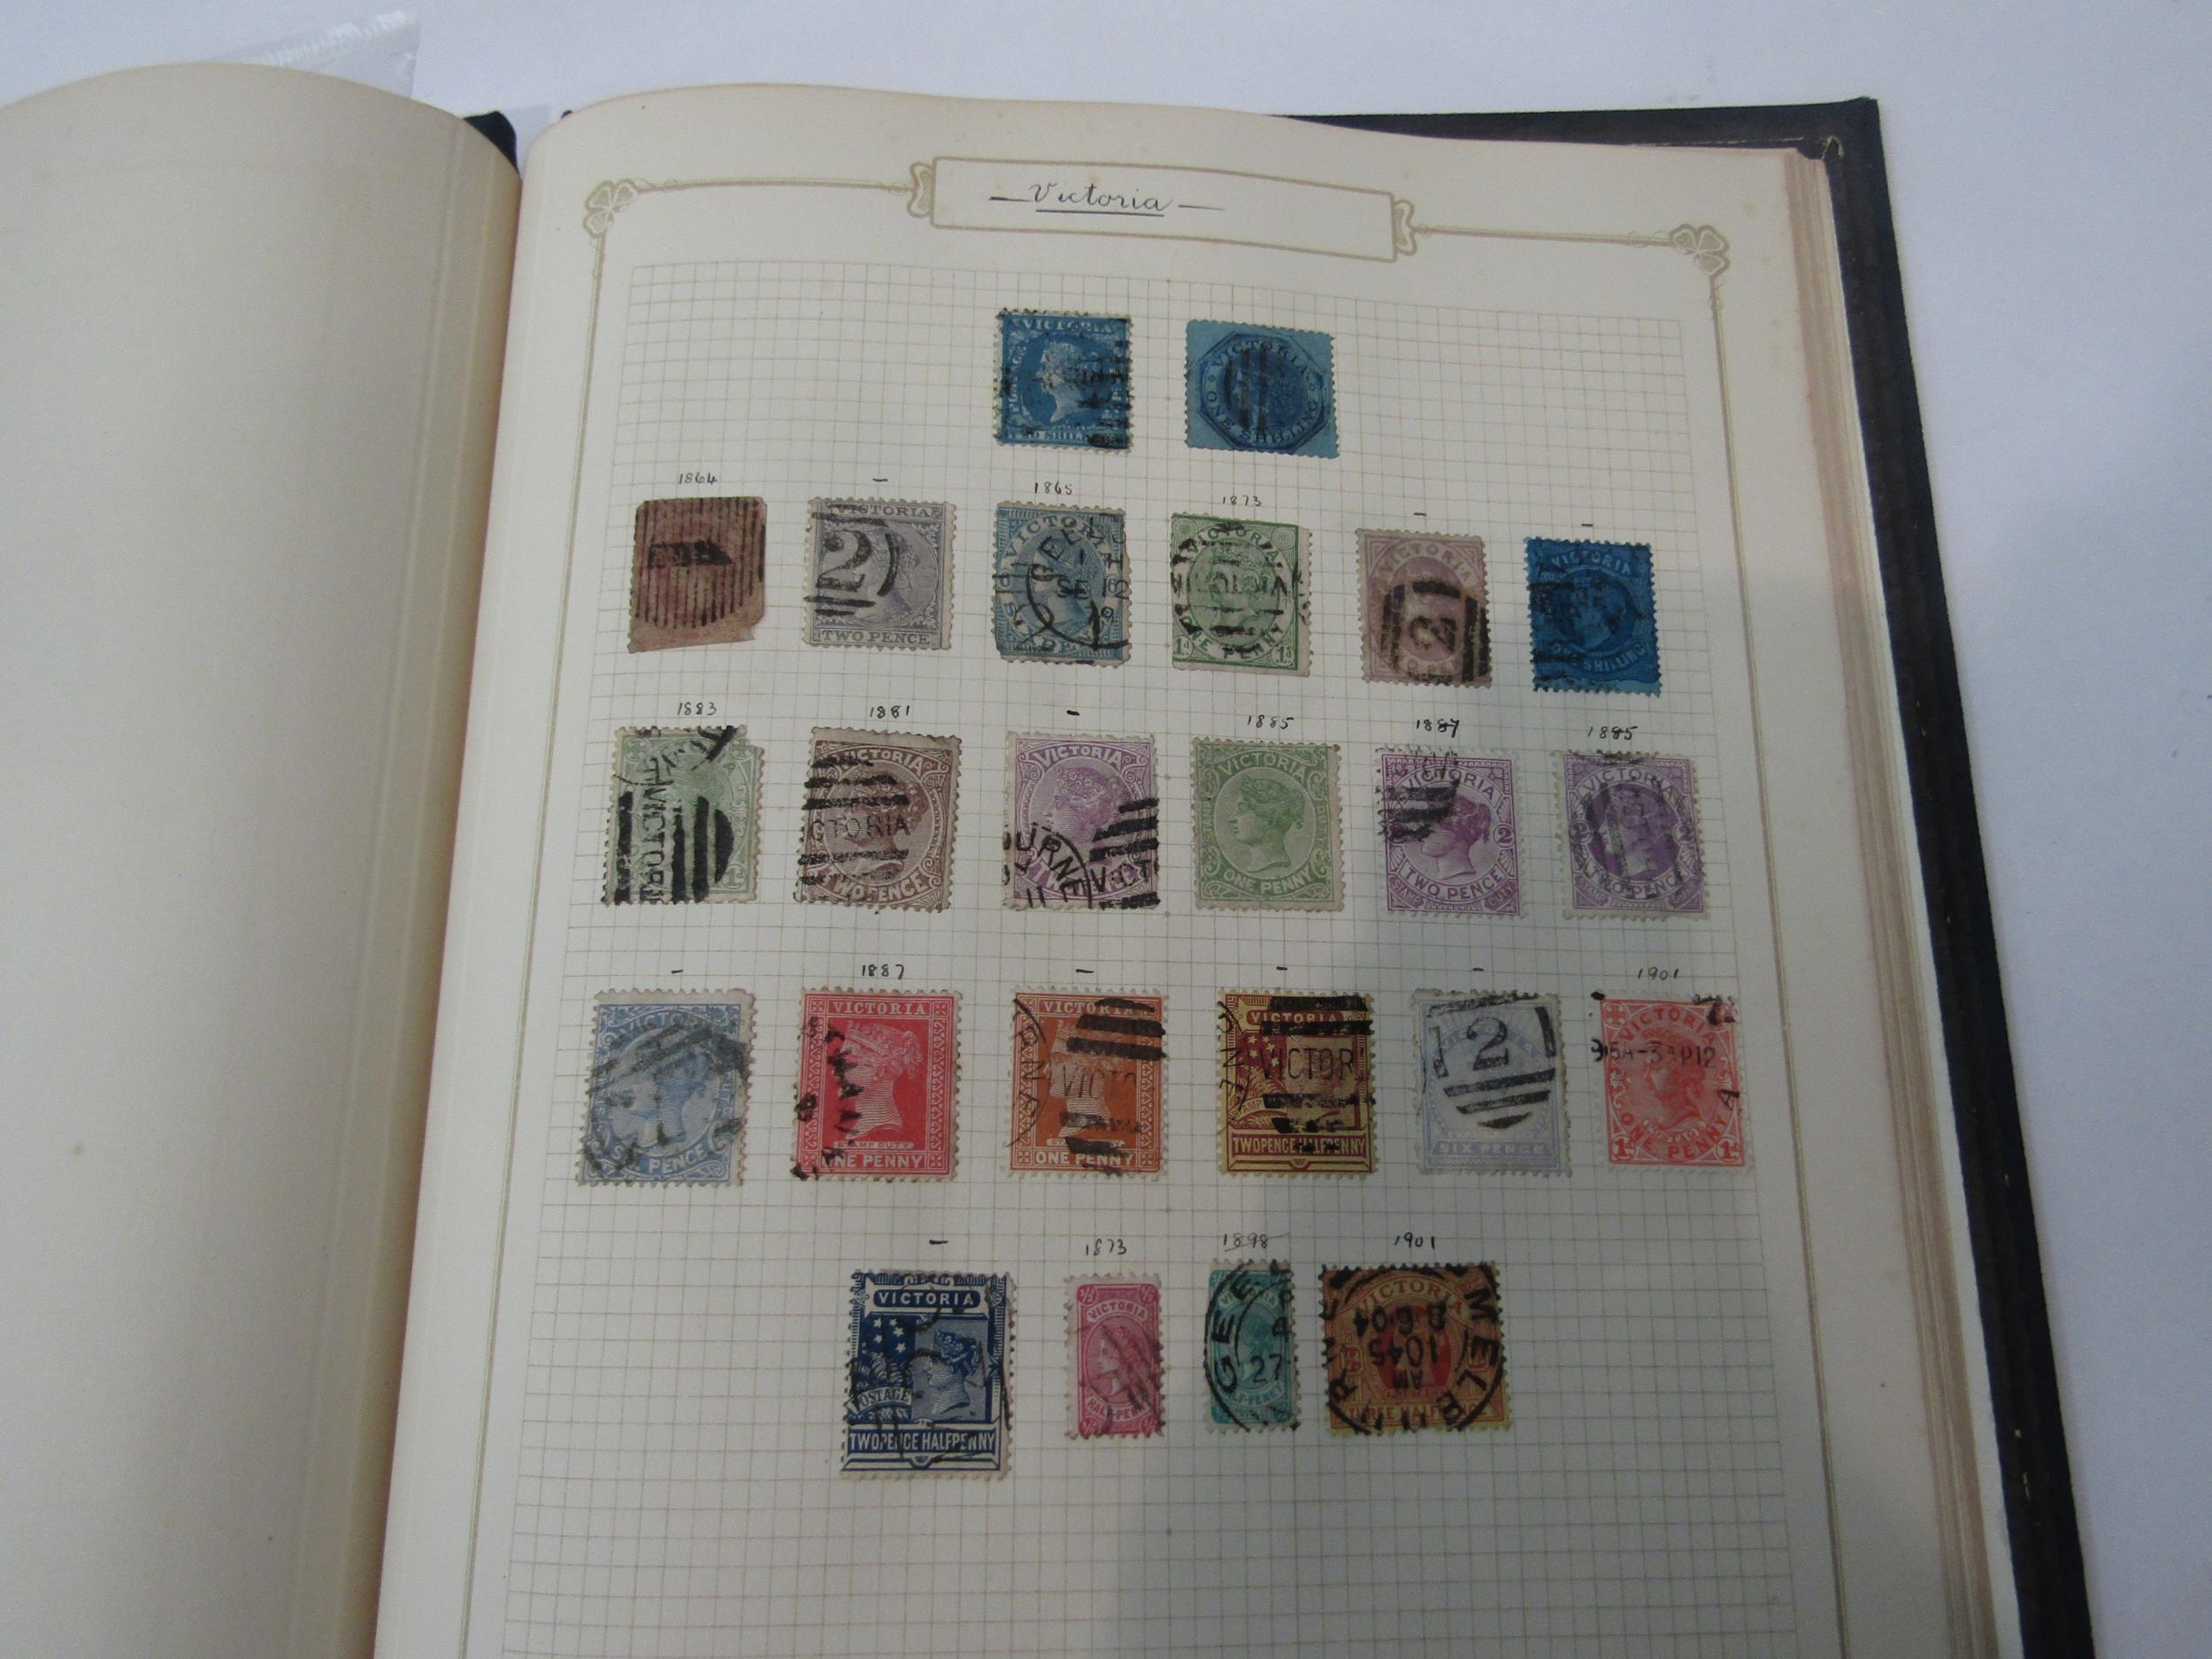 A stamp album containing World stamps including Great Britain penny black, India, Brazil, etc and - Image 2 of 3